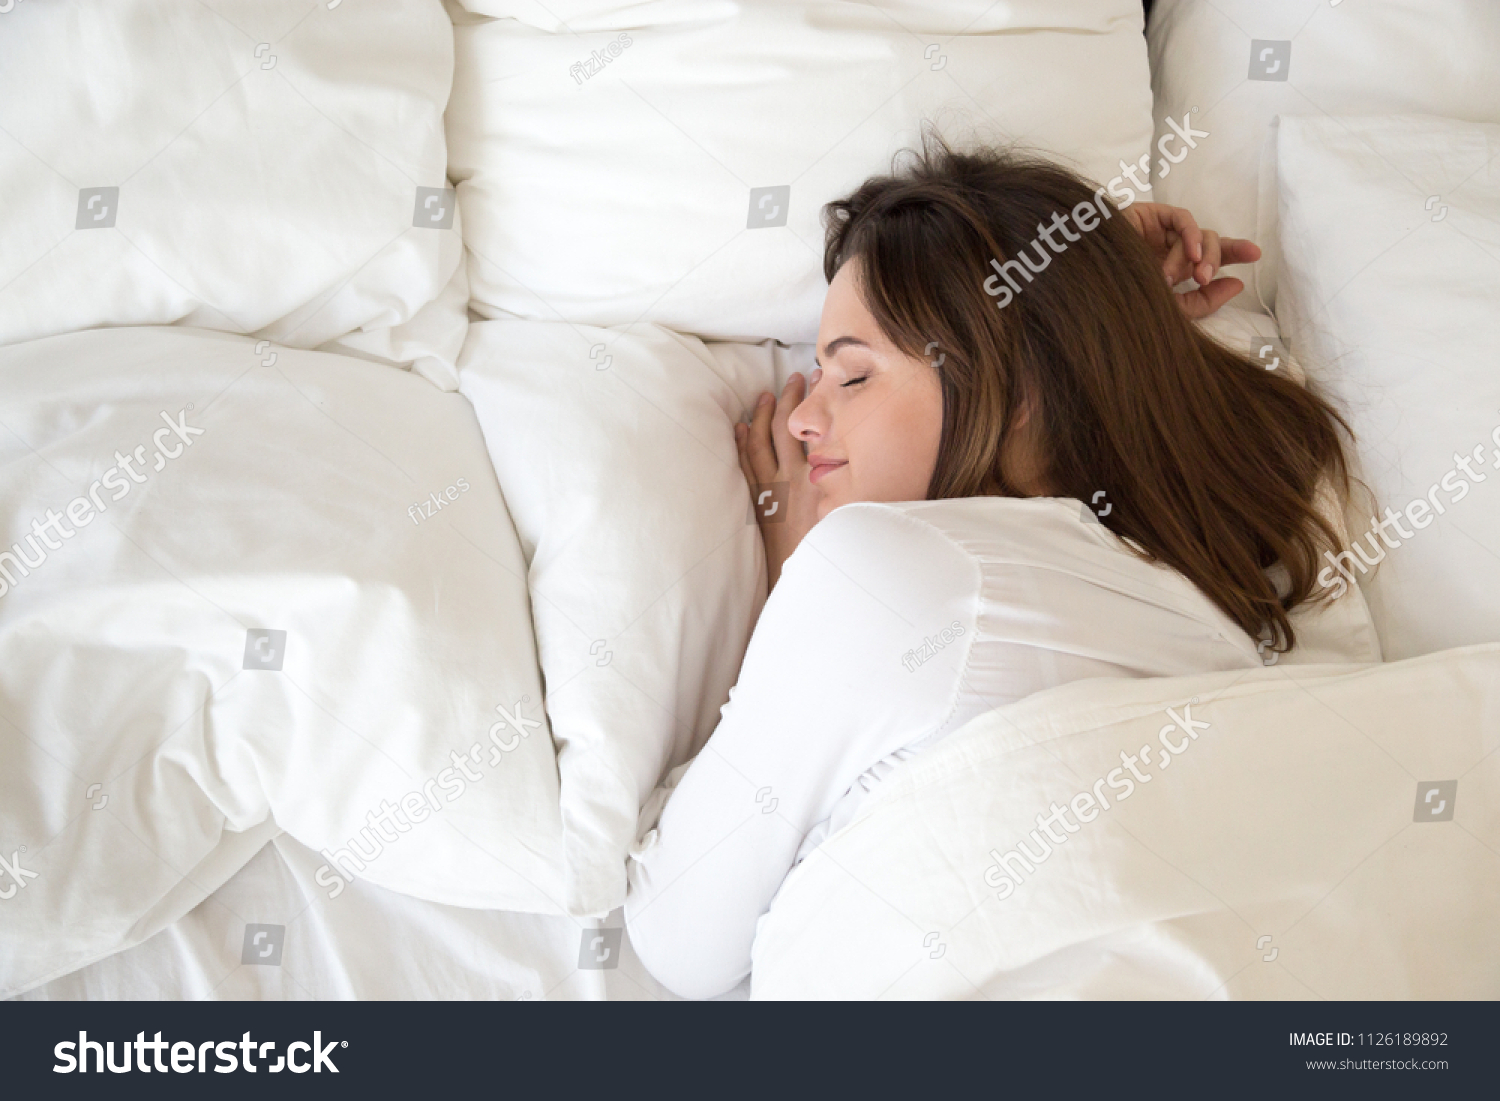 Millennial woman sleeping well on soft pillow and comfortable bed mattress with white cotton sheets under warm duvet having good night sleep enjoying sweet dreams and enough rest concept, top view #1126189892